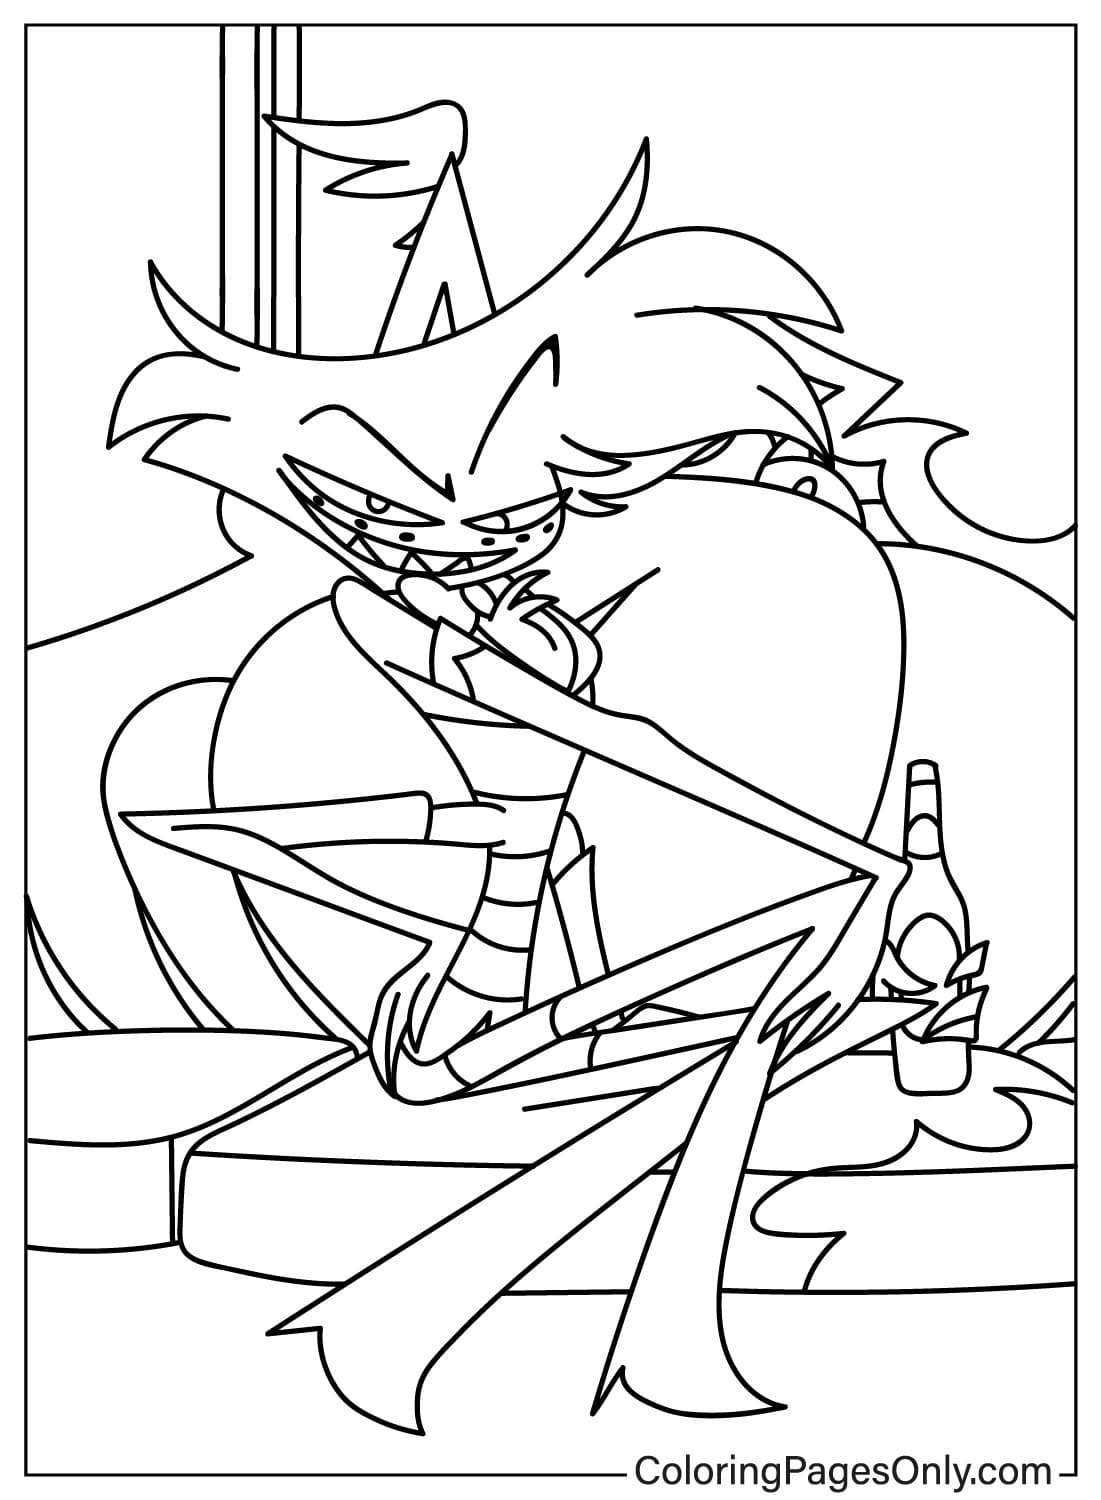 Drinking Angel Dust Coloring Page from Angel Dust